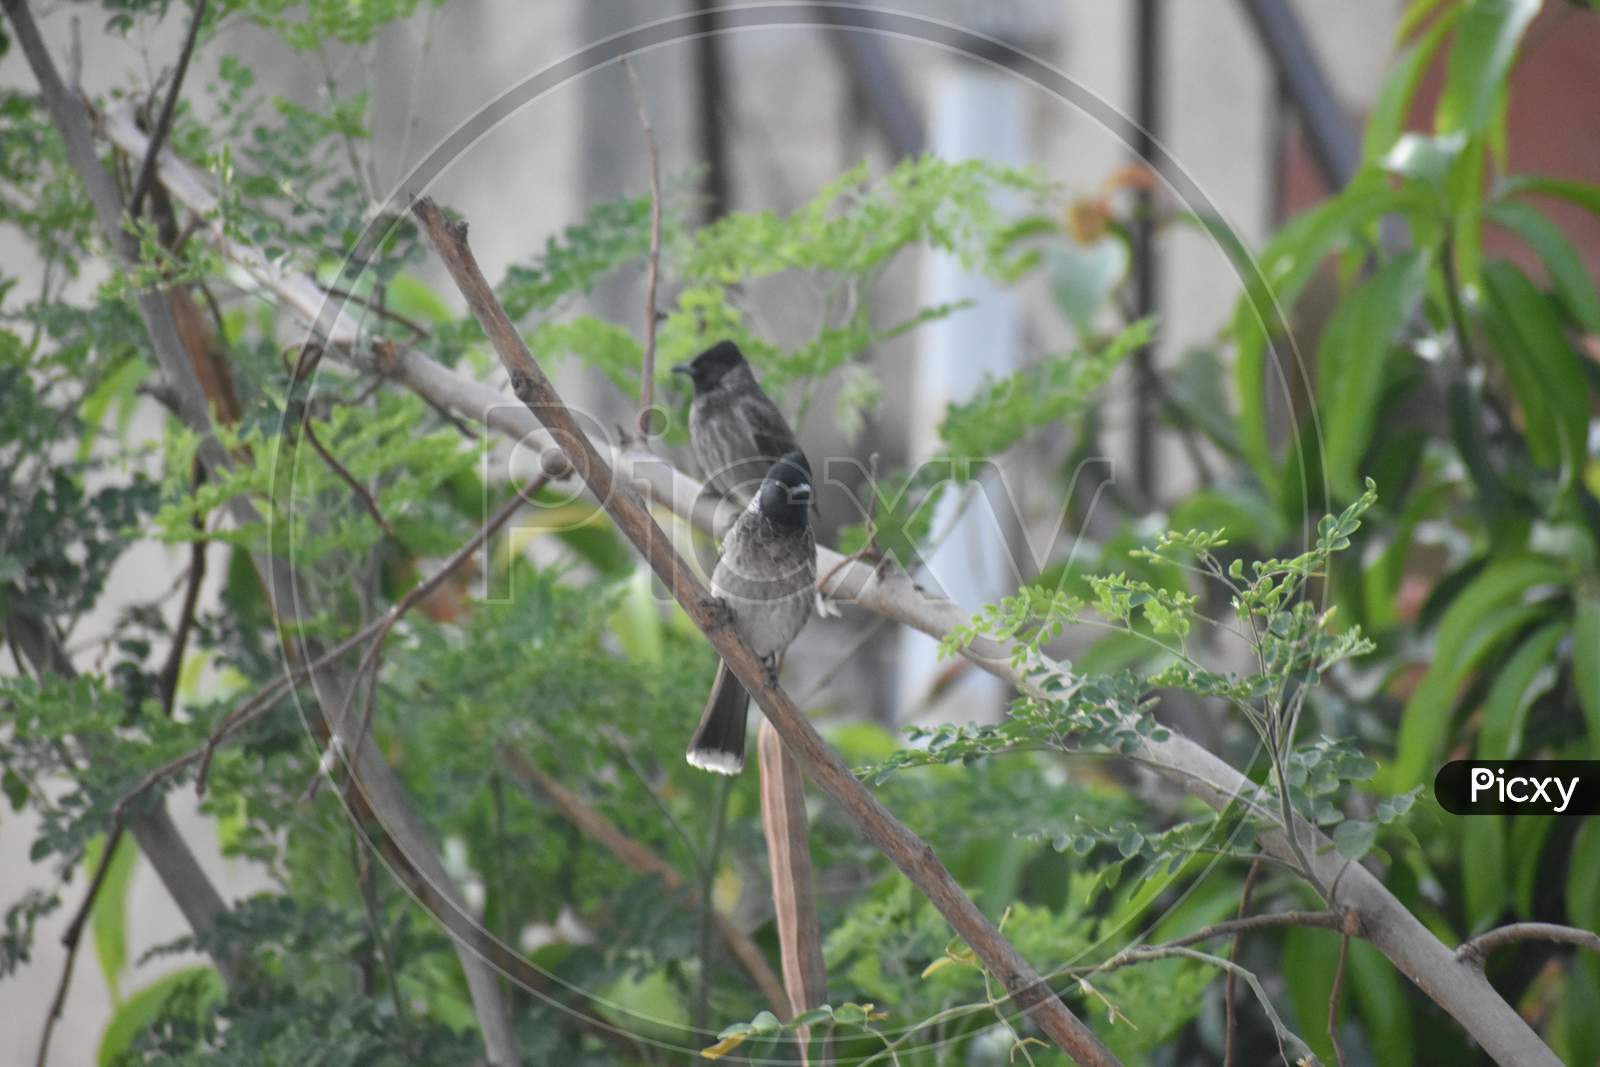 Two red vented bulbul